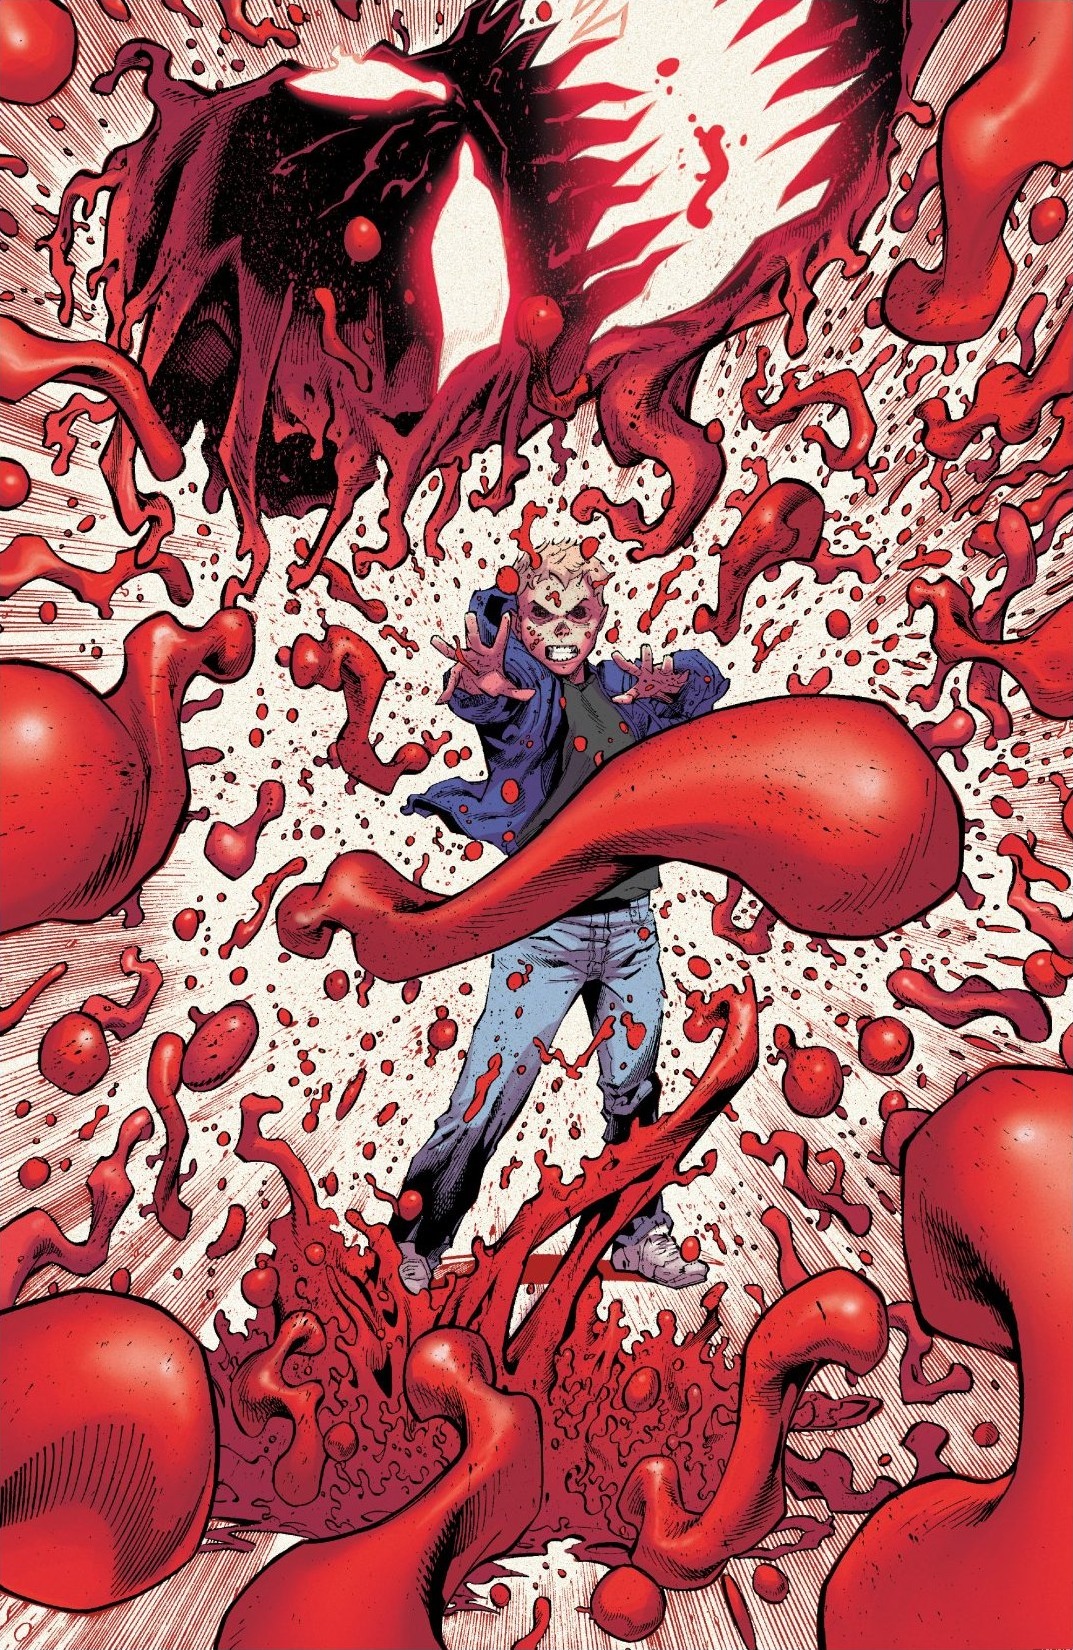 e05z11-From_the_Pages_of_Absolute_Carnage__05__2019_-w693kmp1ia041.jpg